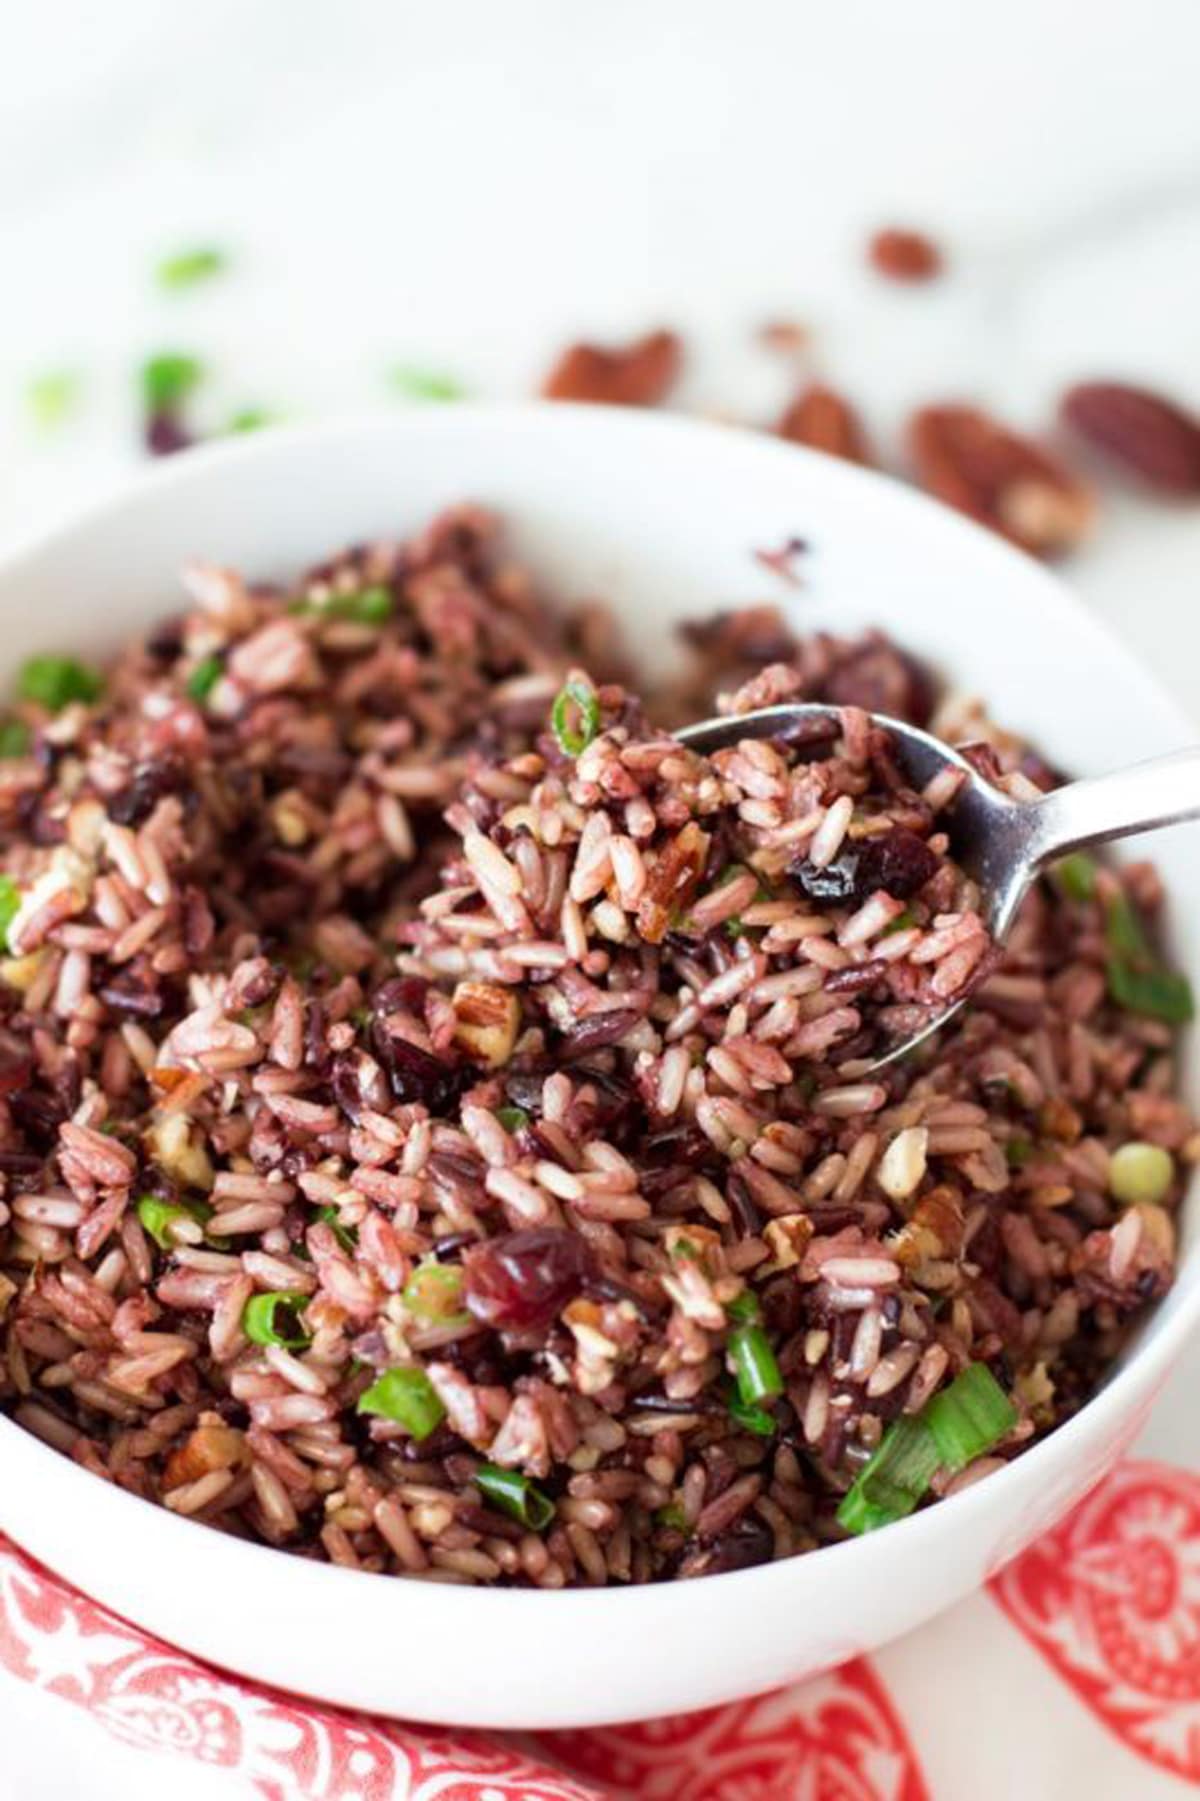 Spoonful of brown and wild rice topped with scallions.